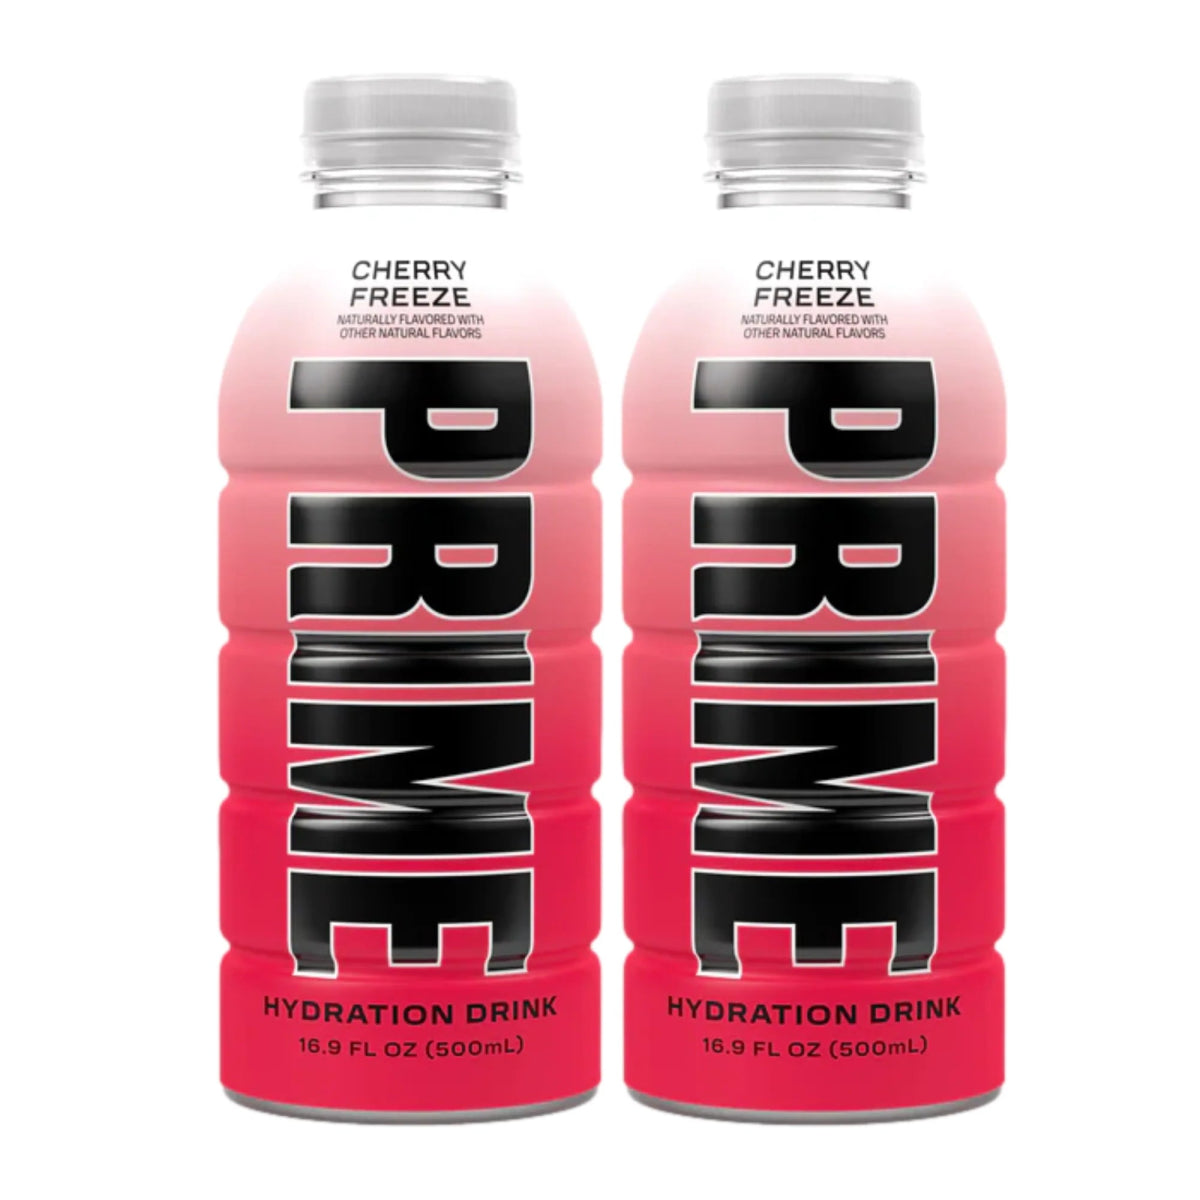 Twin Pack Prime Hydration By Logan Paul x KSI- Cherry Freeze 2 x 500ml (PRE-ORDER) - Candy Mail UK